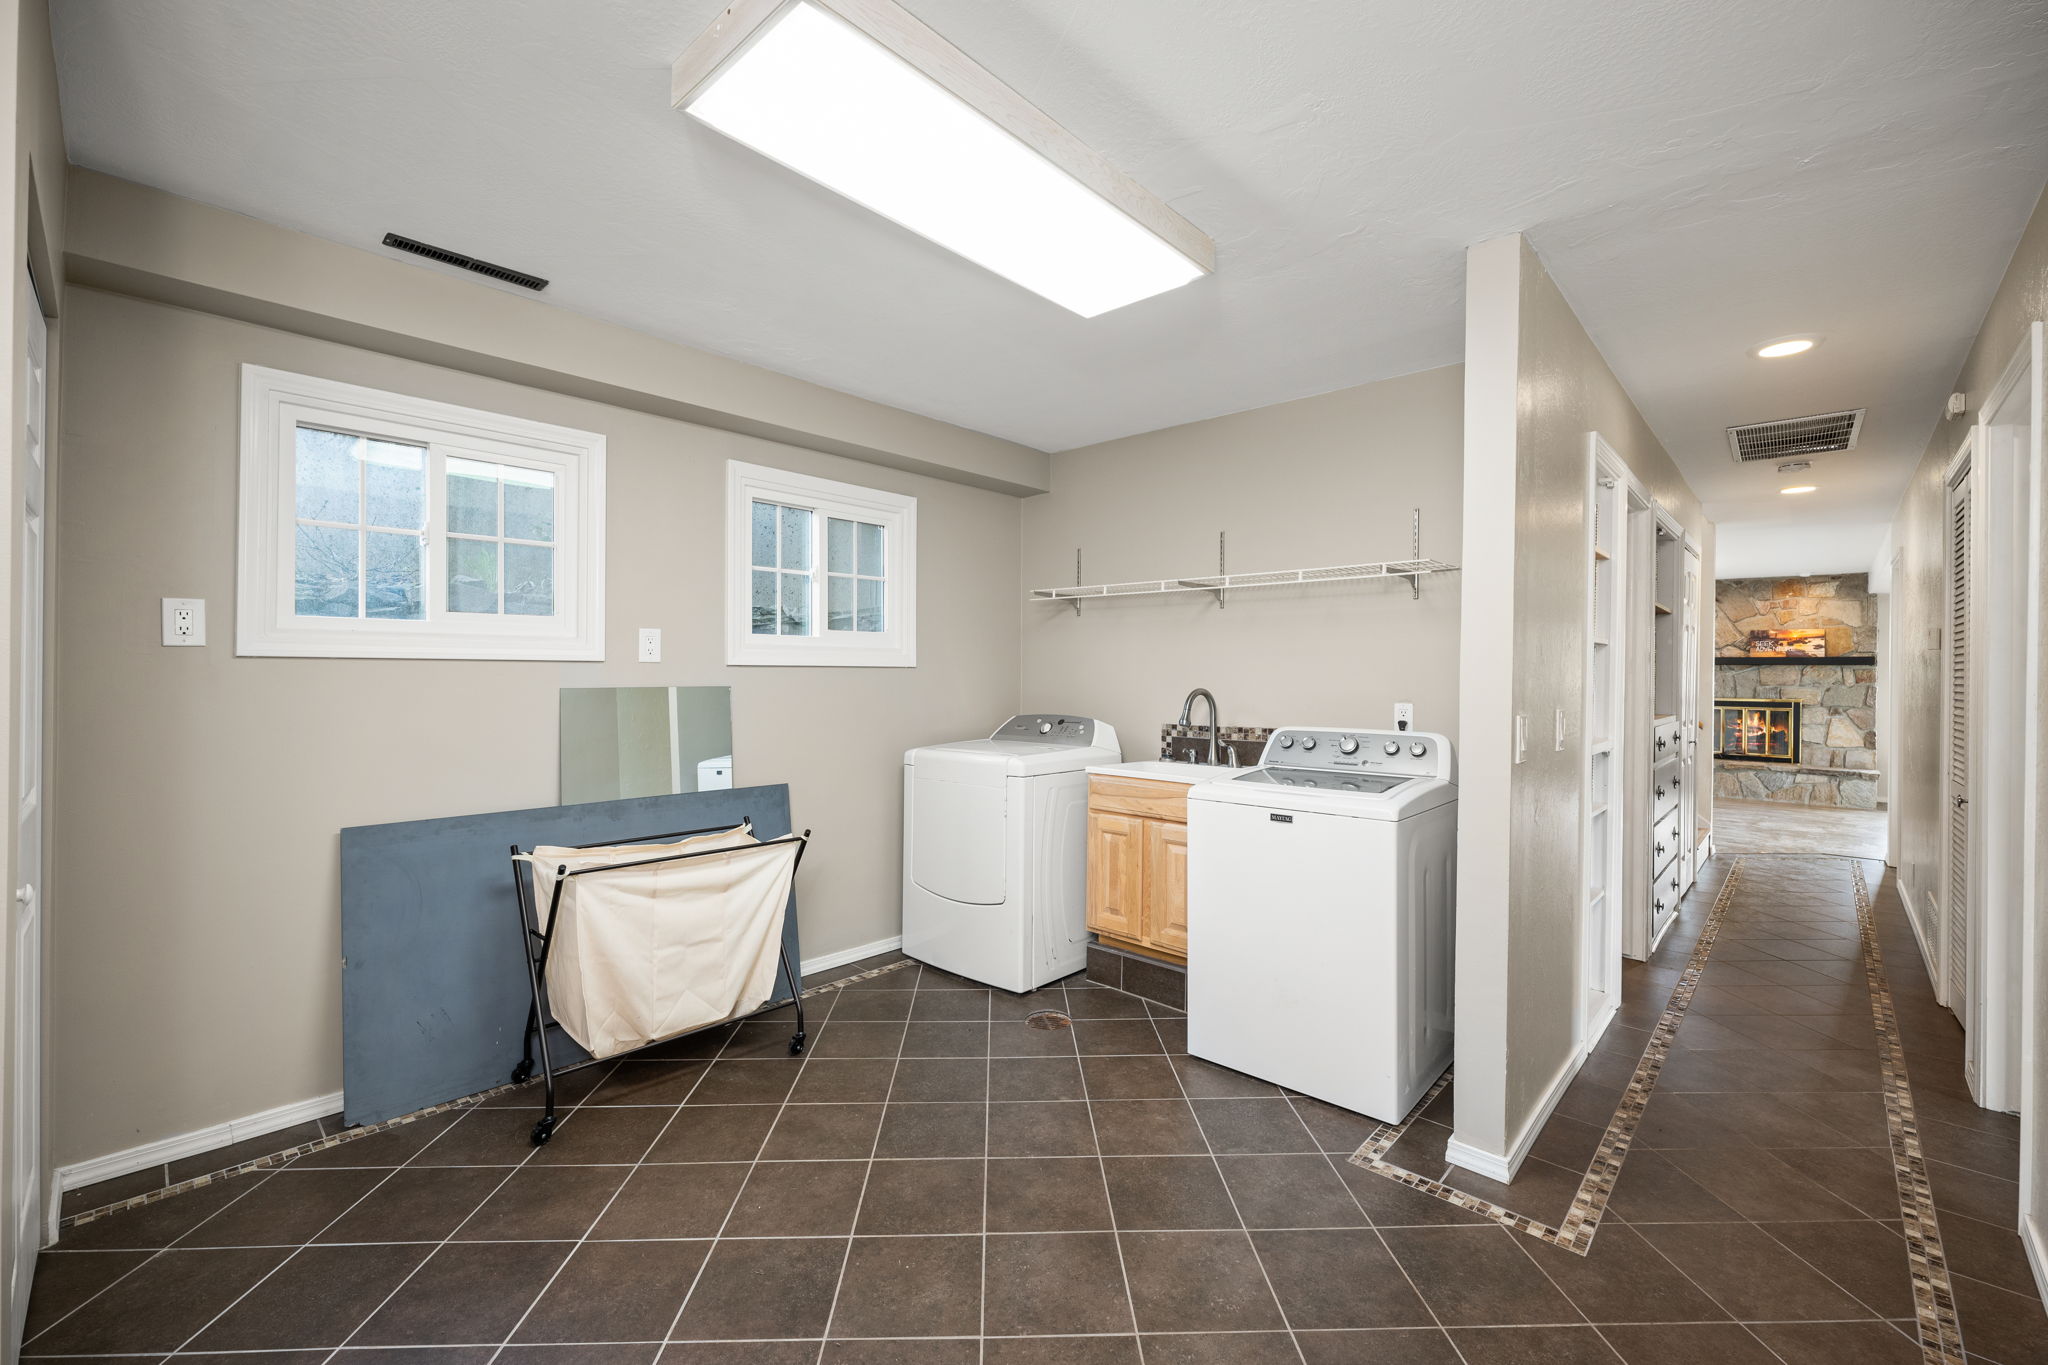 Large laundry room, washer dryer included